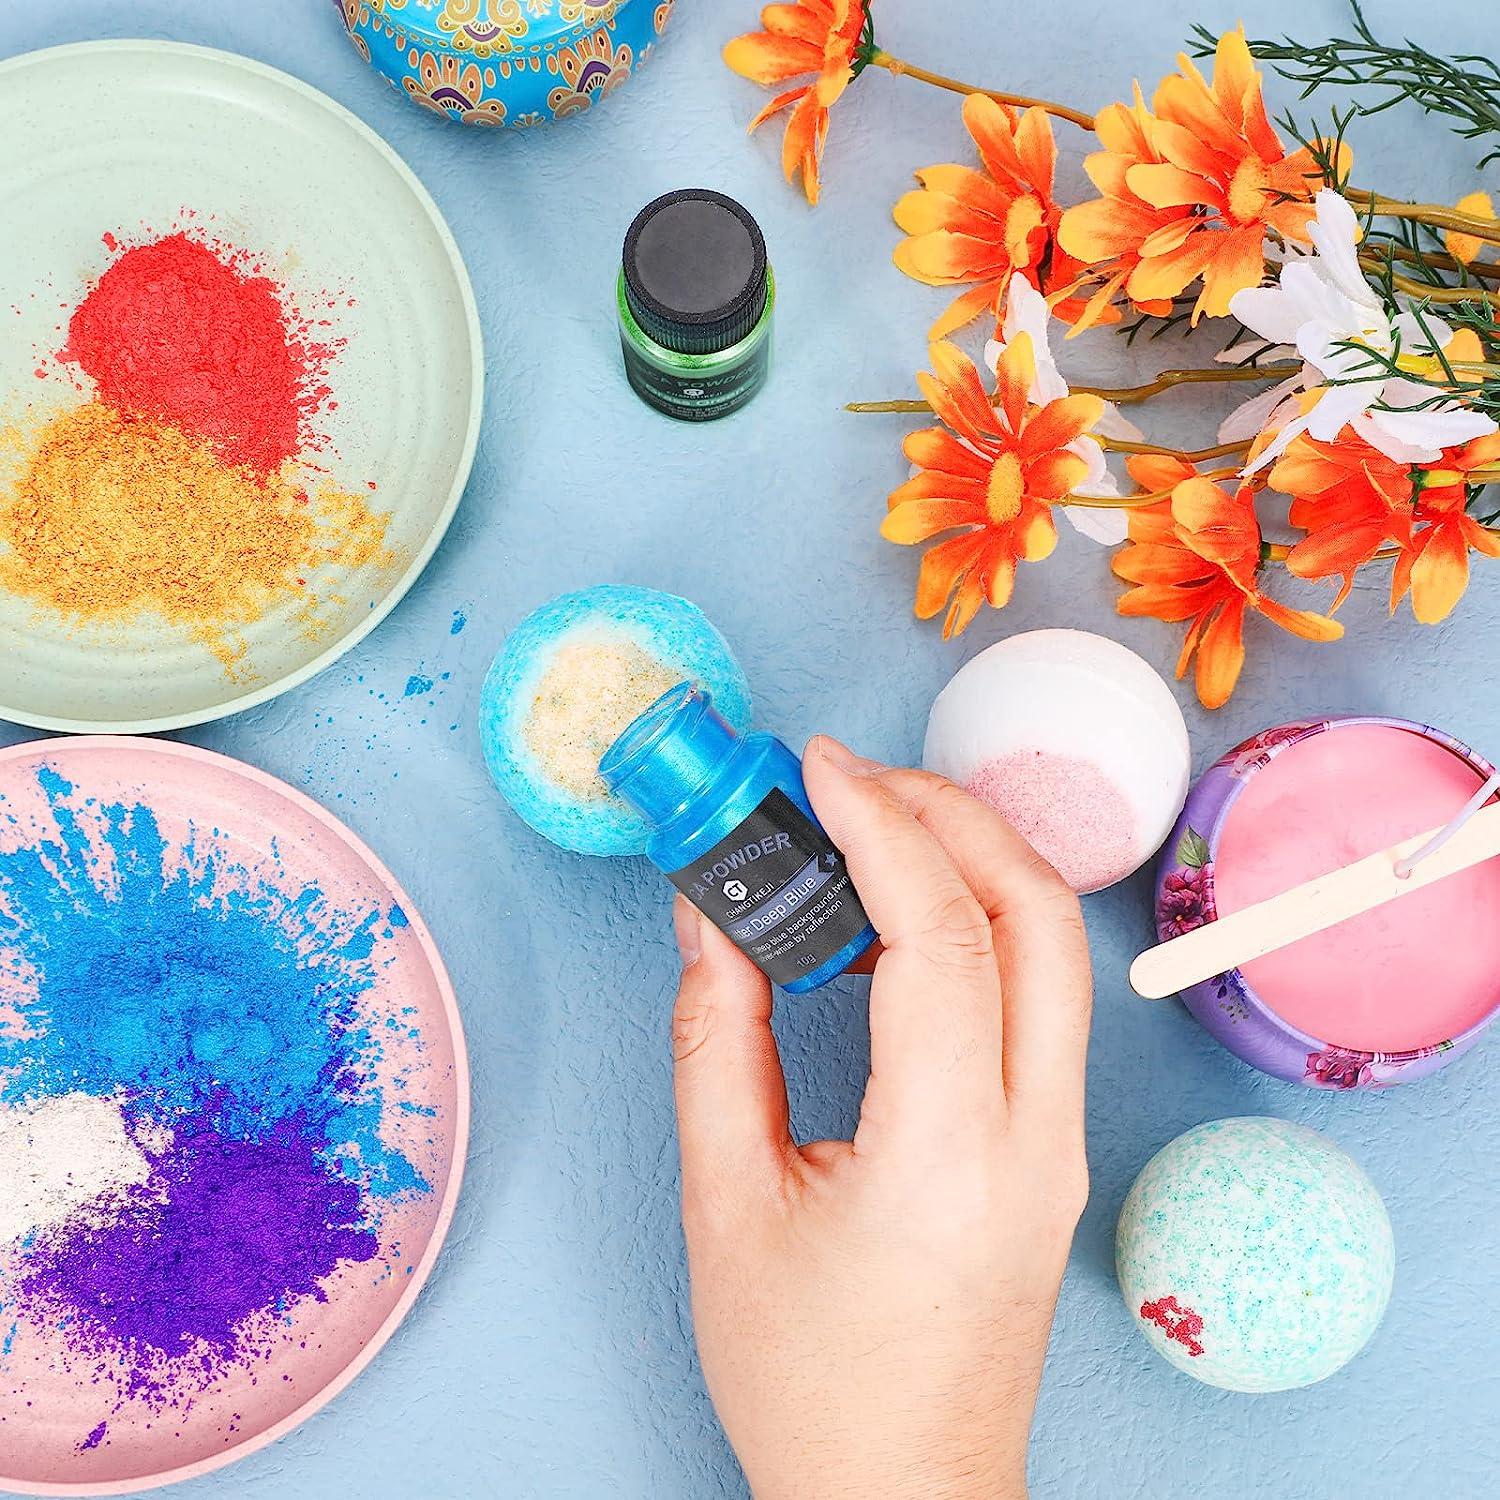 Mica Powder vs. Pigment Powder - What is the difference? - The Blue Bottle  Tree